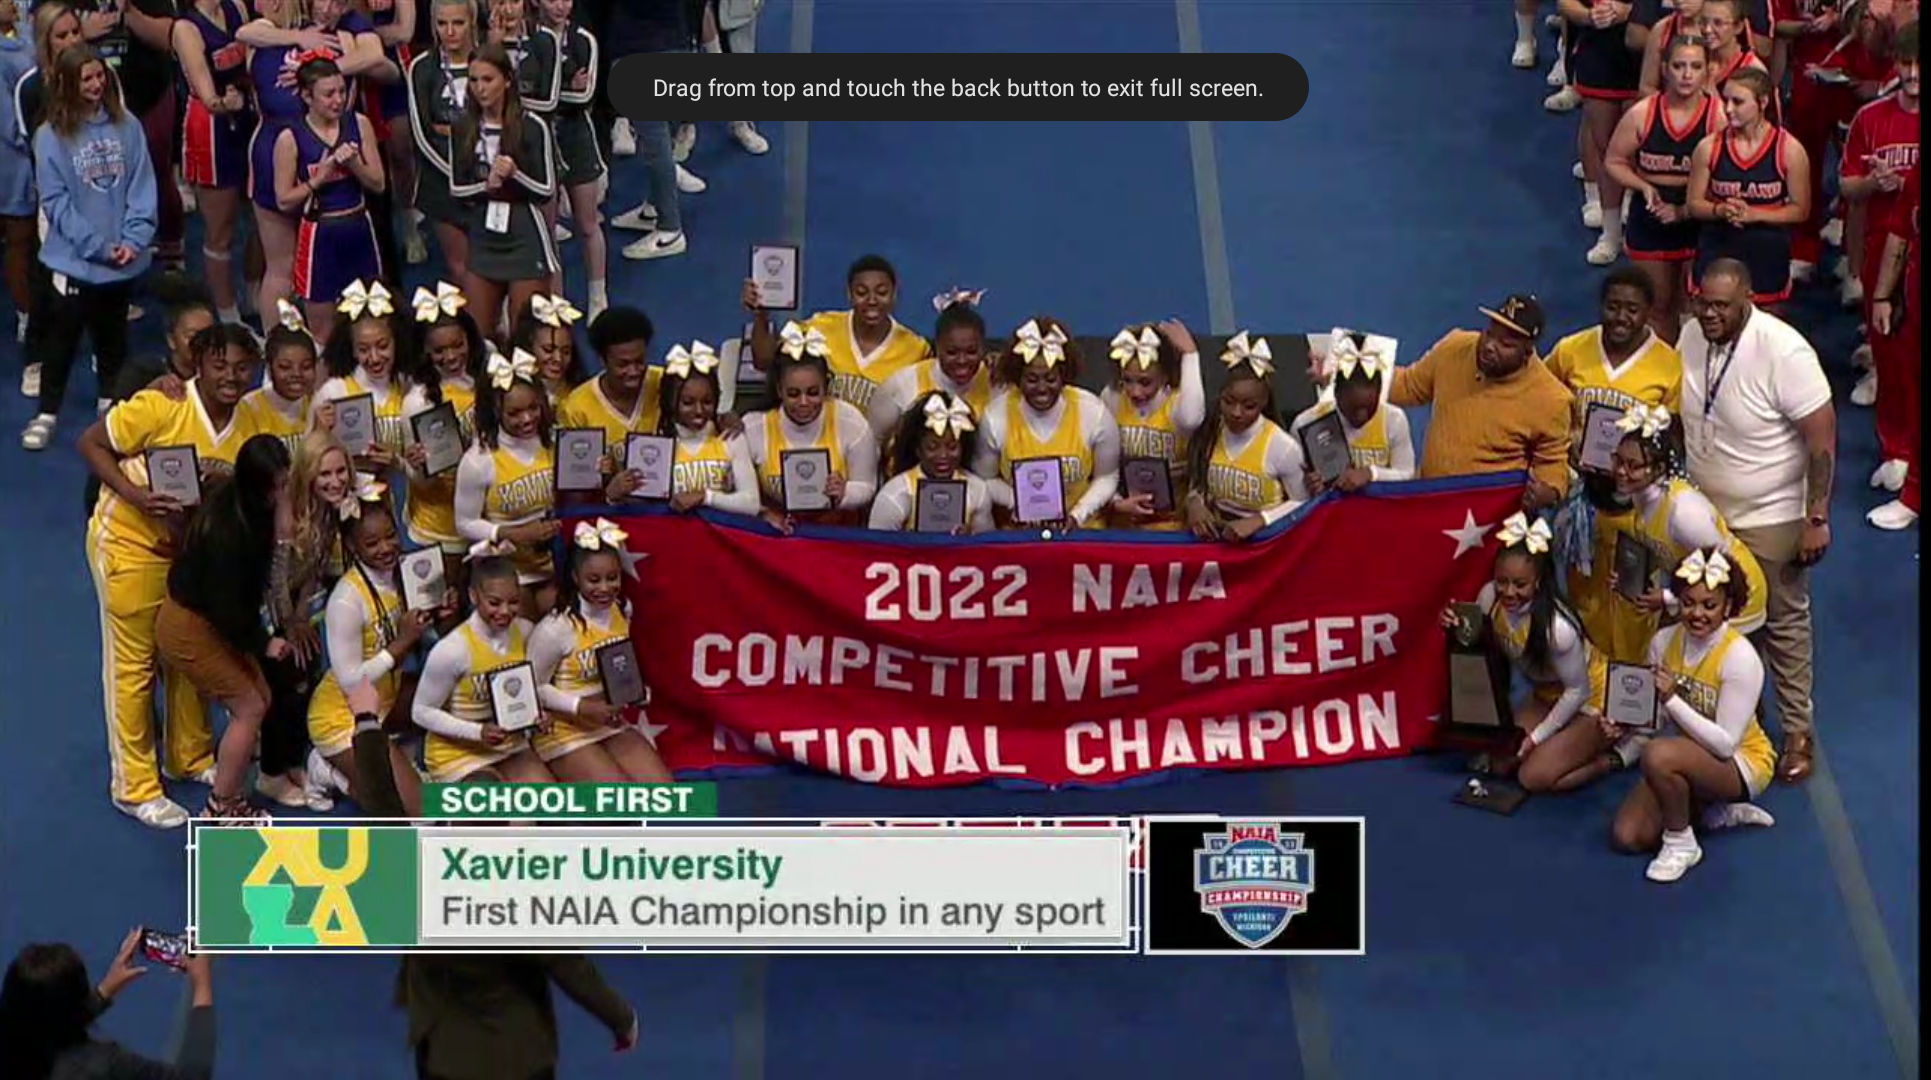 Gold for Gold: Xavier University of Louisiana wins first-ever national championship with record-setting competitive cheer victory